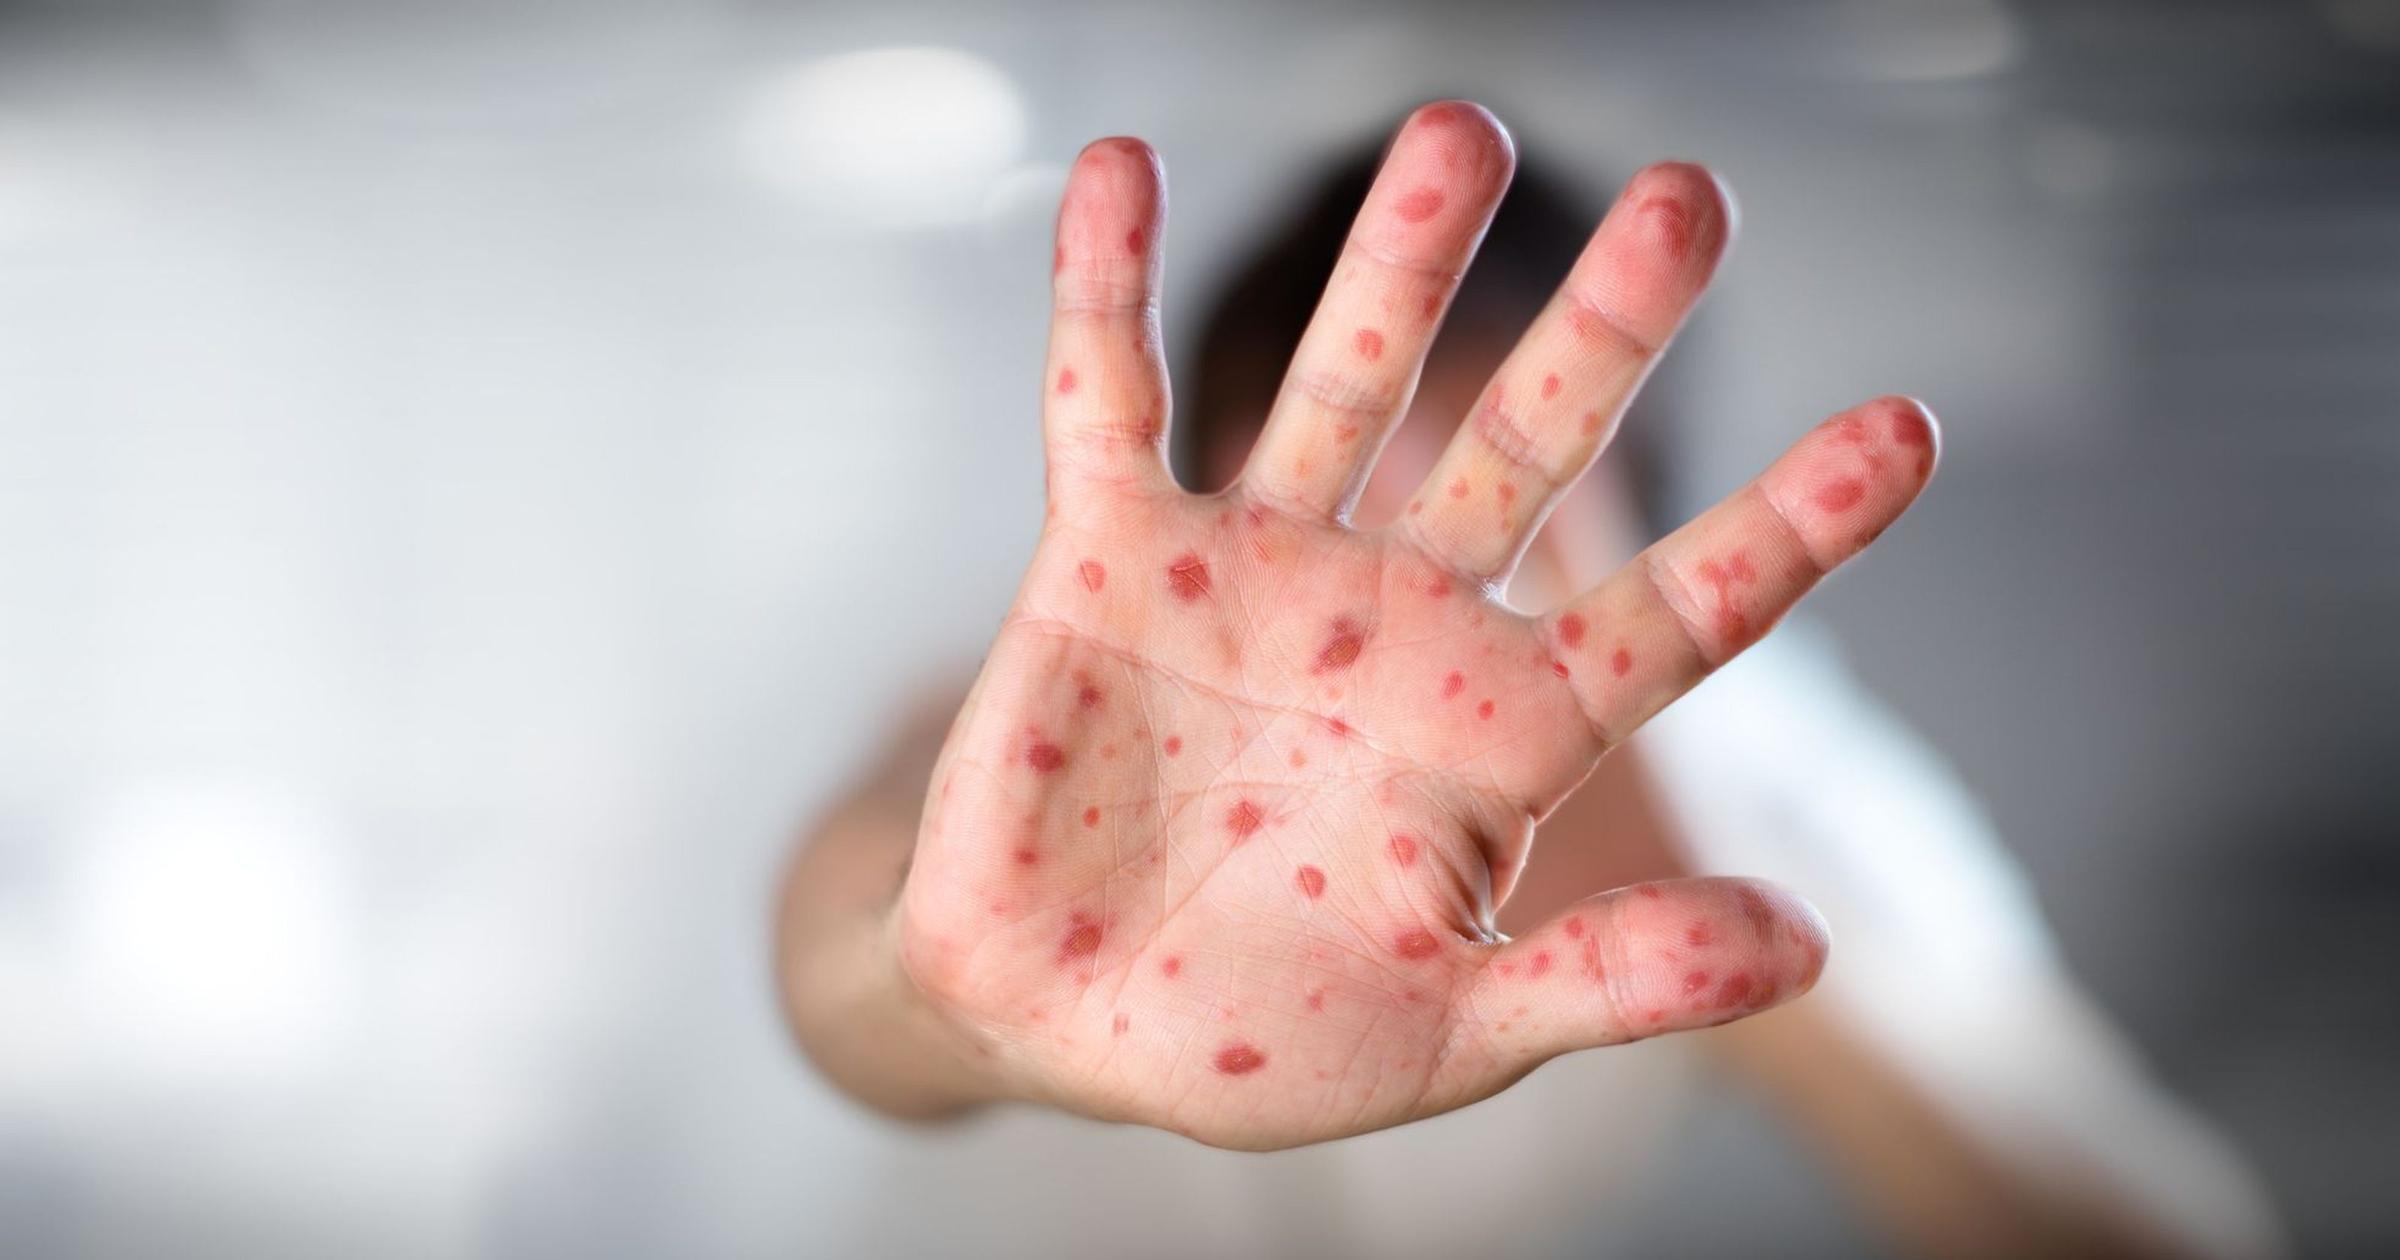 U.S. Measles Cases Already Top Last Year’s Total